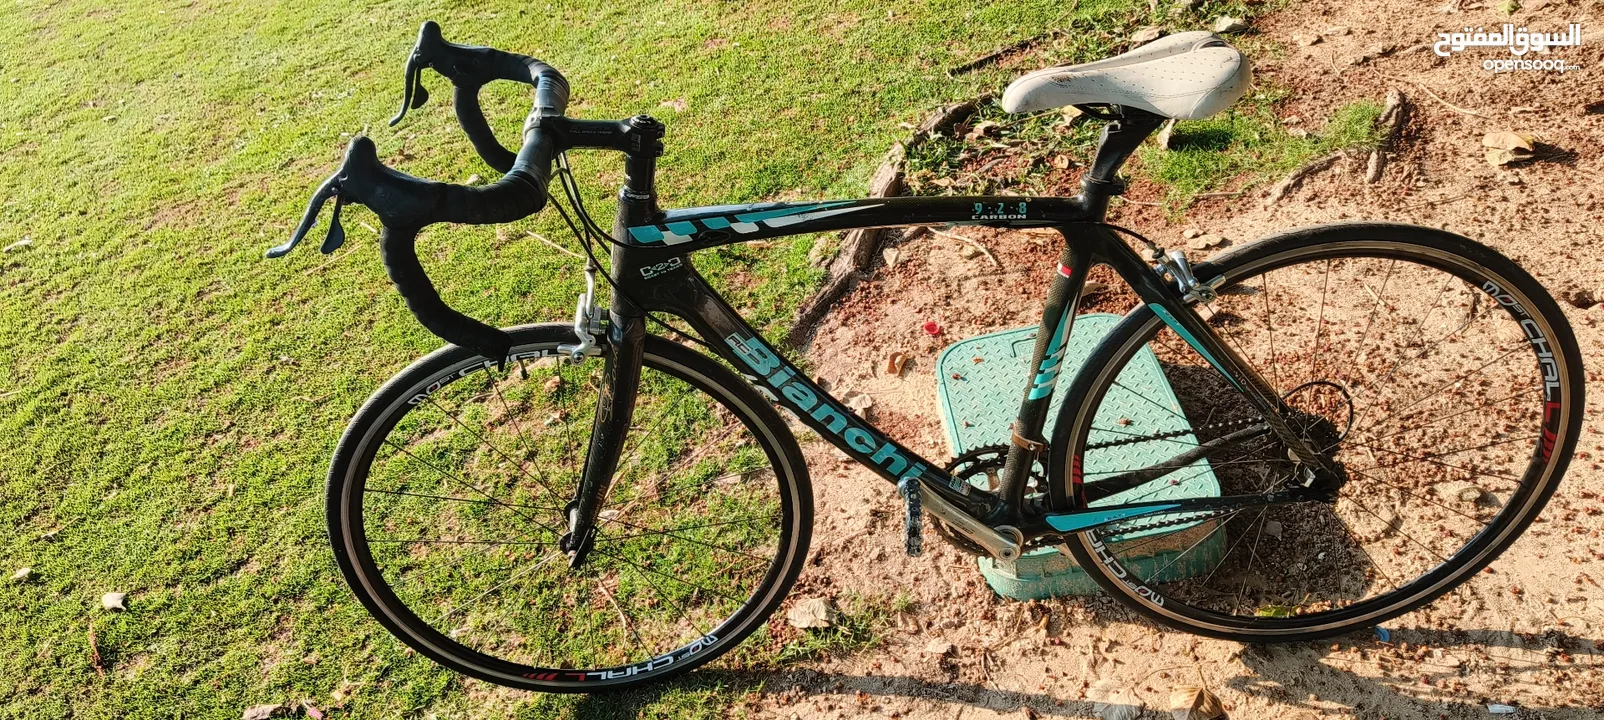 BIANCHI 928 C2C 10 ITALY FOR SELL